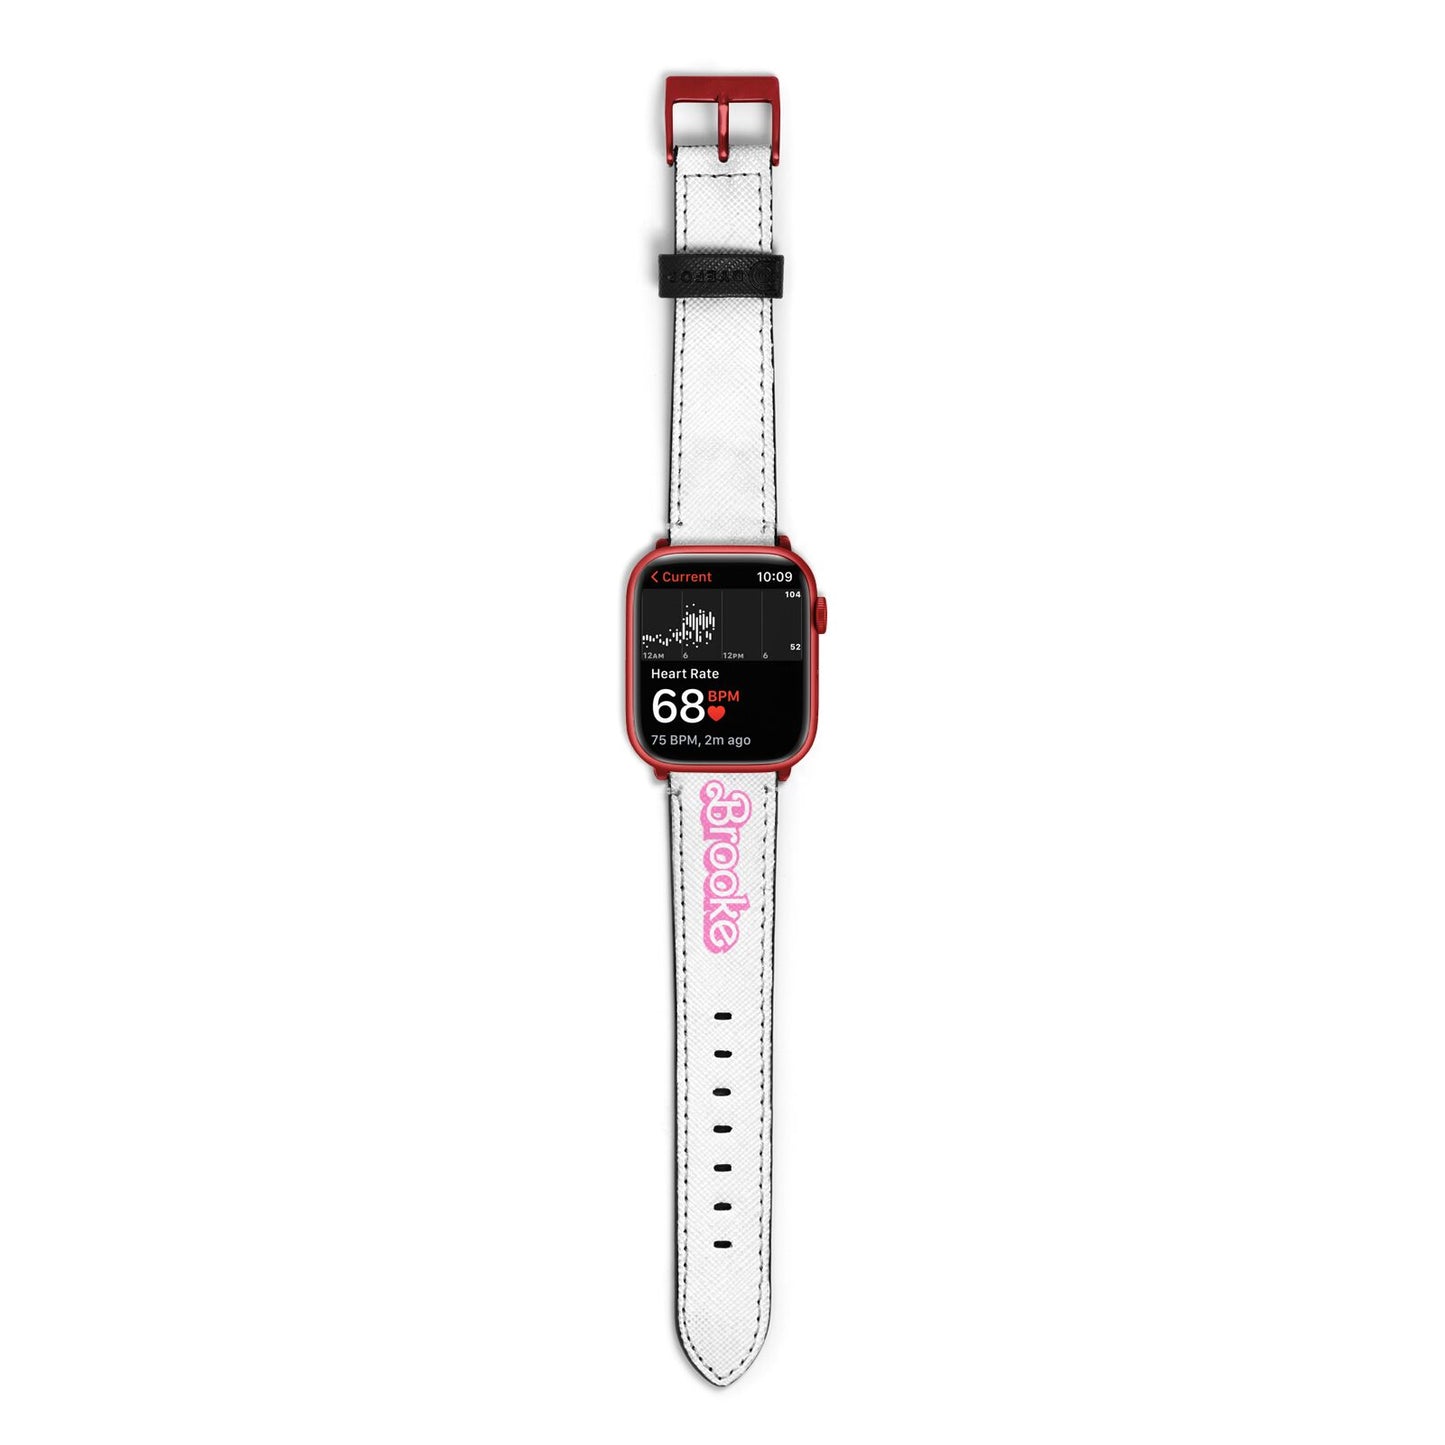 Dream Name Apple Watch Strap Size 38mm with Red Hardware